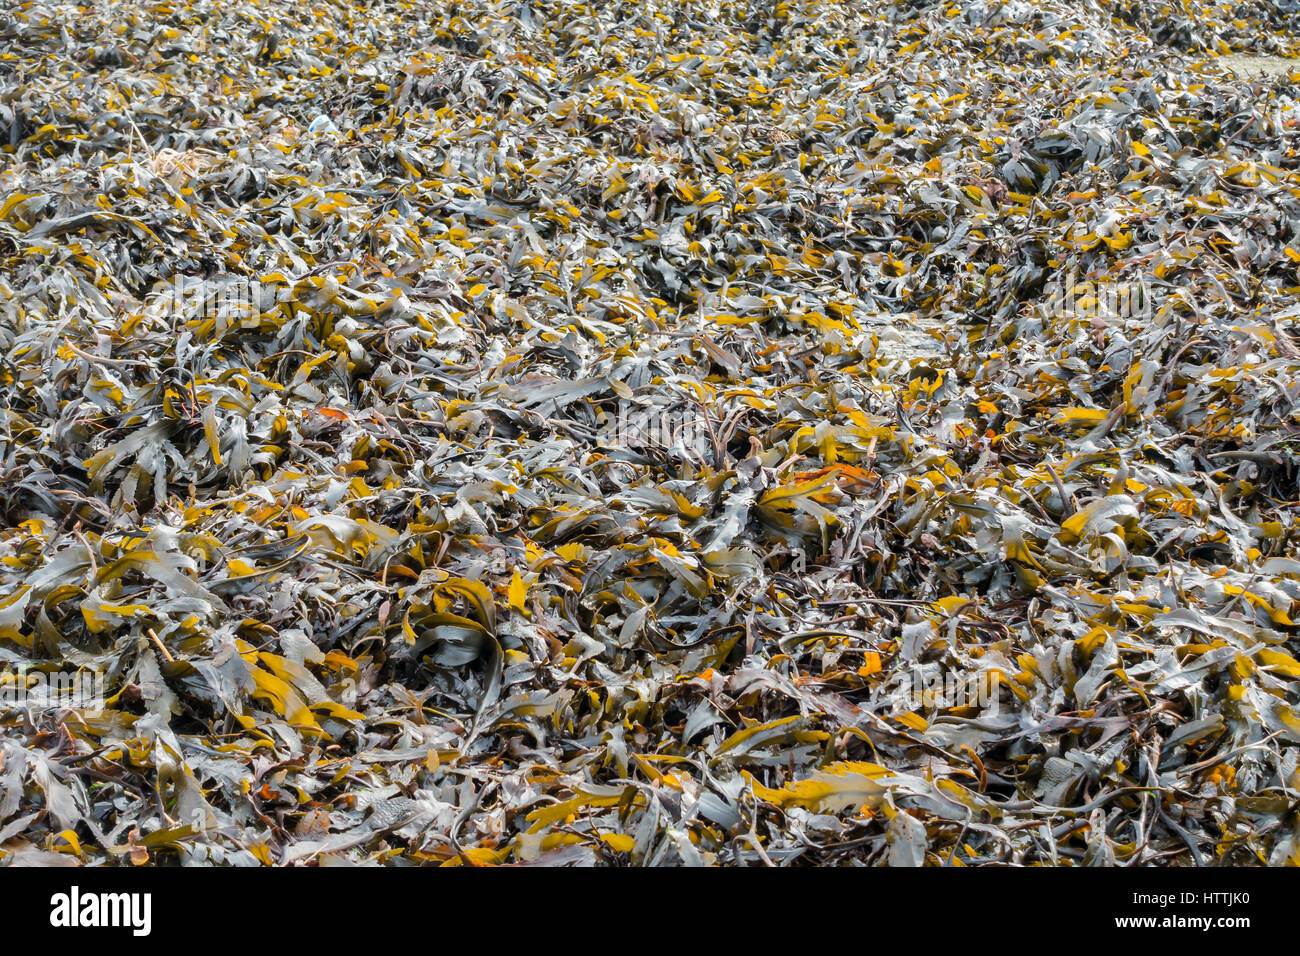 Large bed of seaweed on a slipway in the United Kingdom. Stock Photo